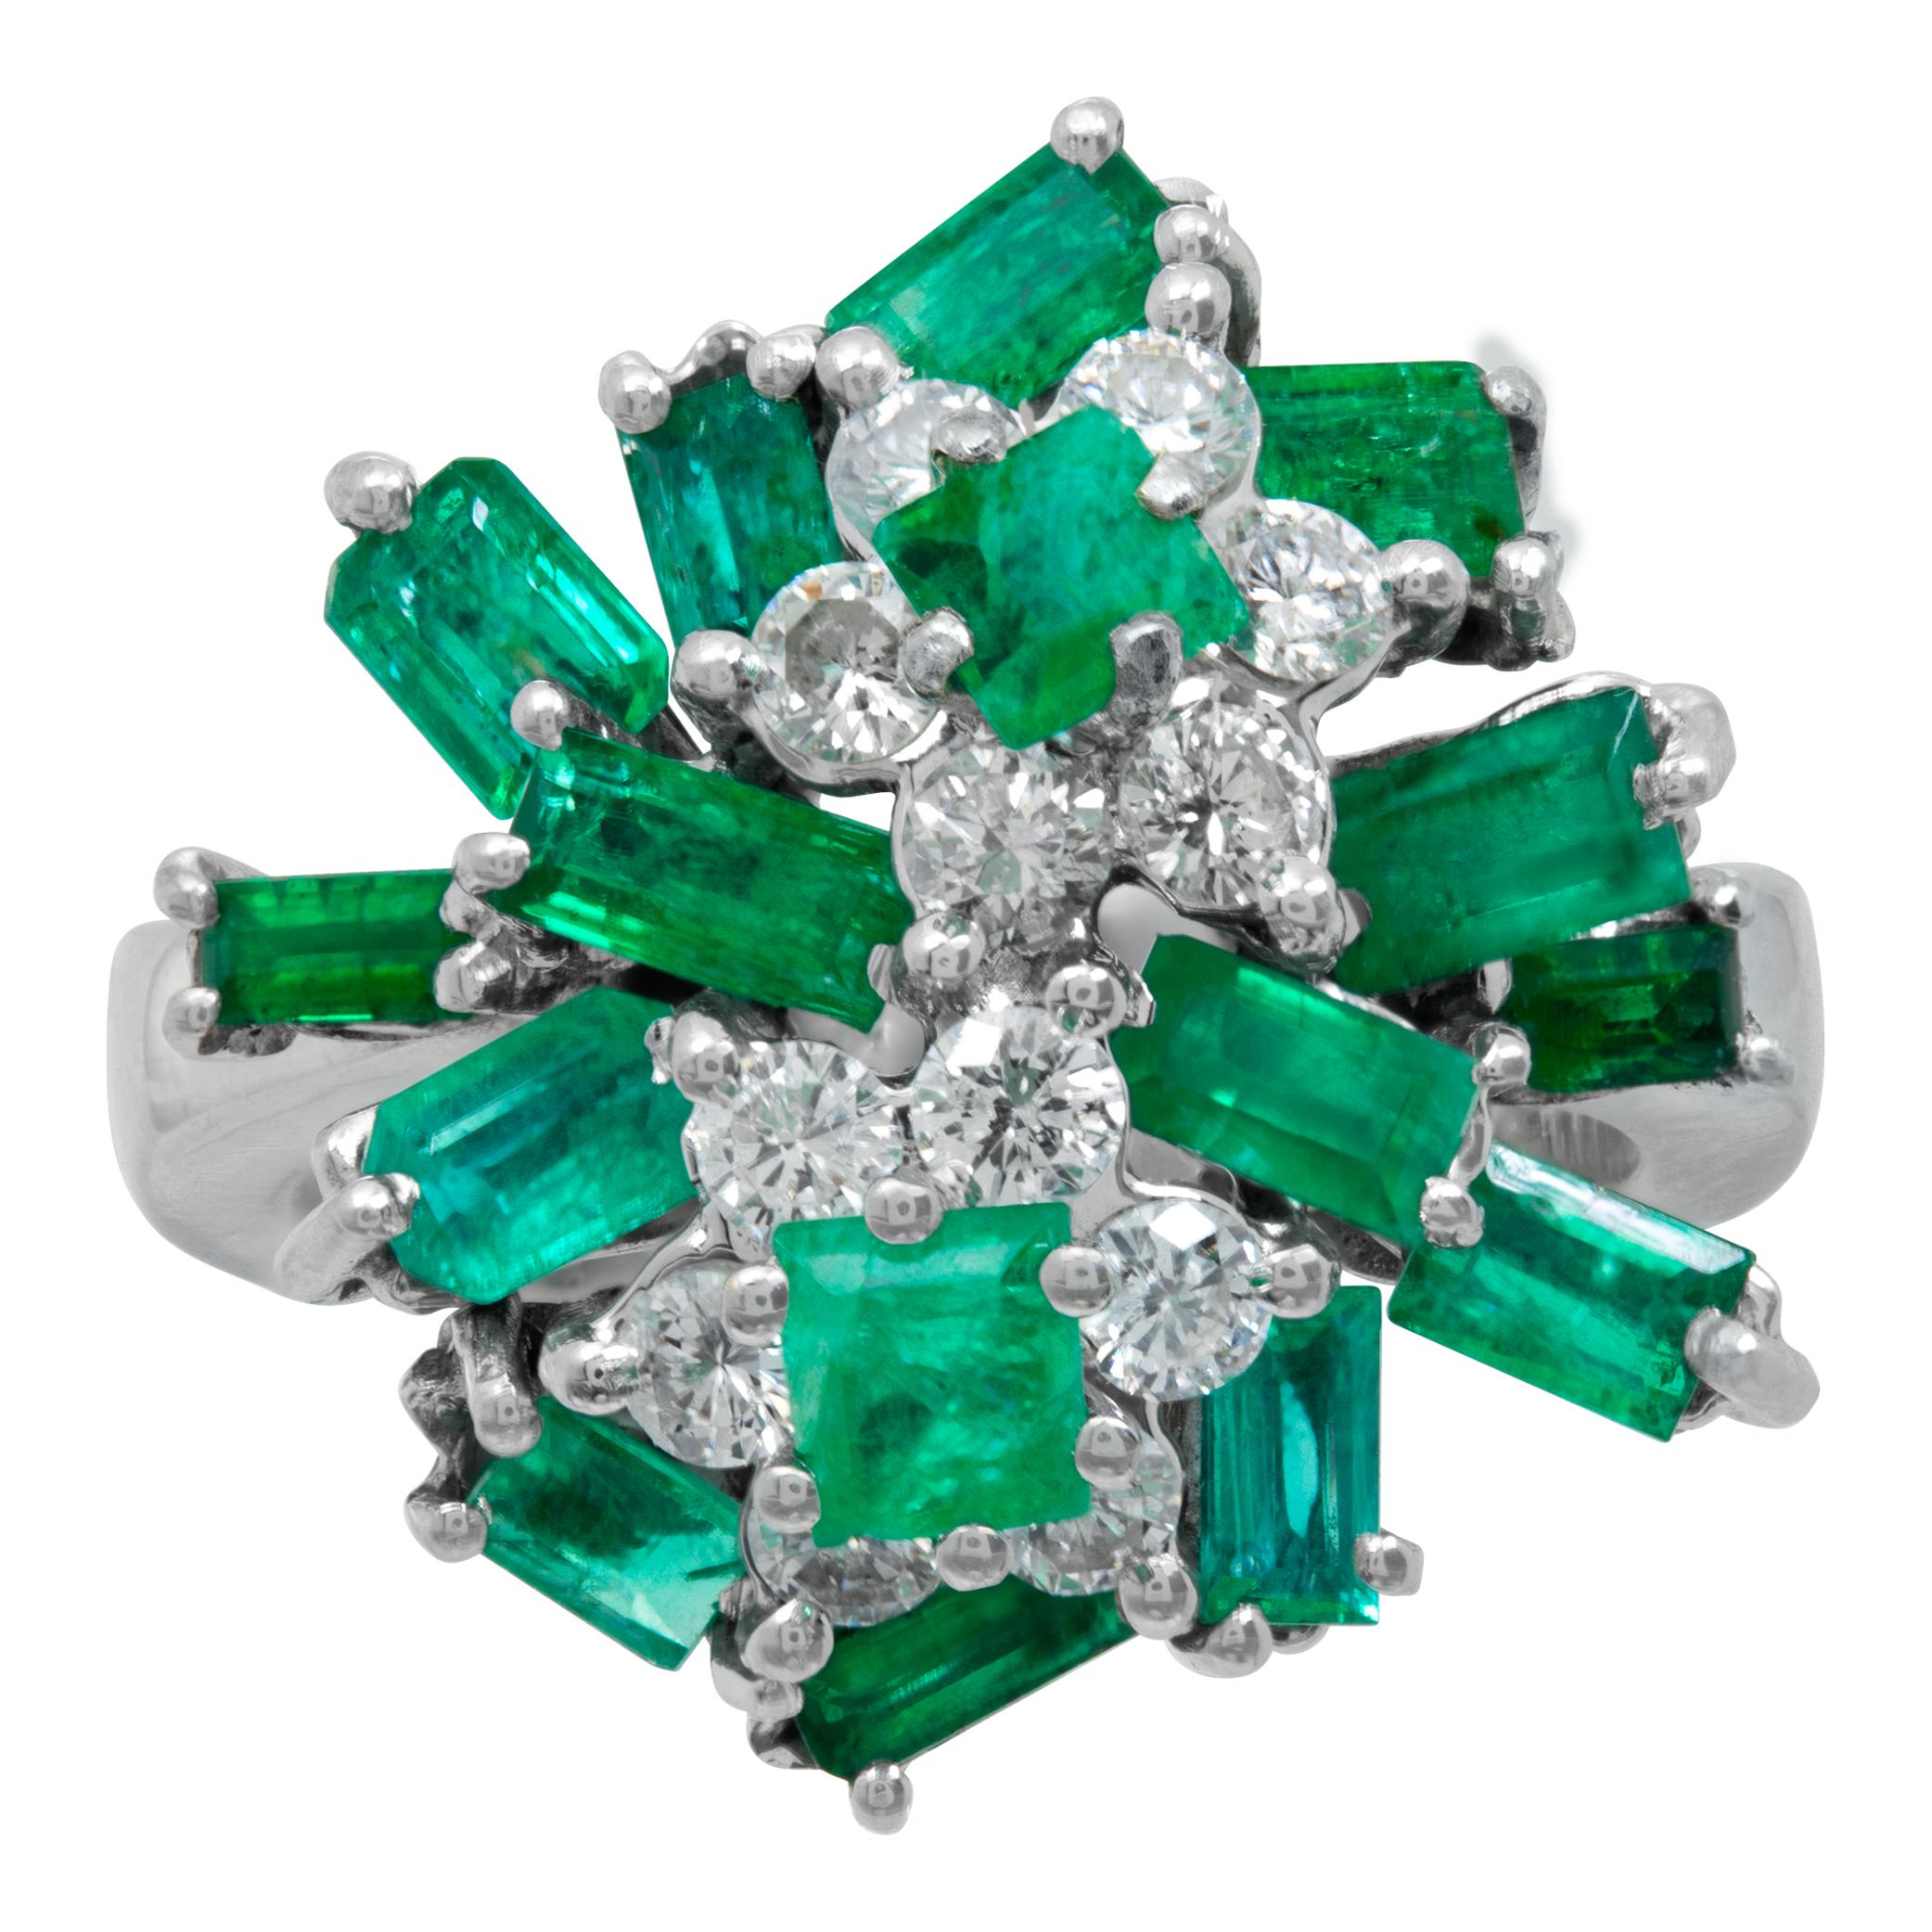 Emerald and diamond cocktail Ballerina ring in 18K white gold with approximately 2 carats in princess and baguette cut Emeralds and 0.5 carats in round brilliant cut diamonds (G Color, SI Clarity). Size 5.5. measures 20mm x 20mm.

This